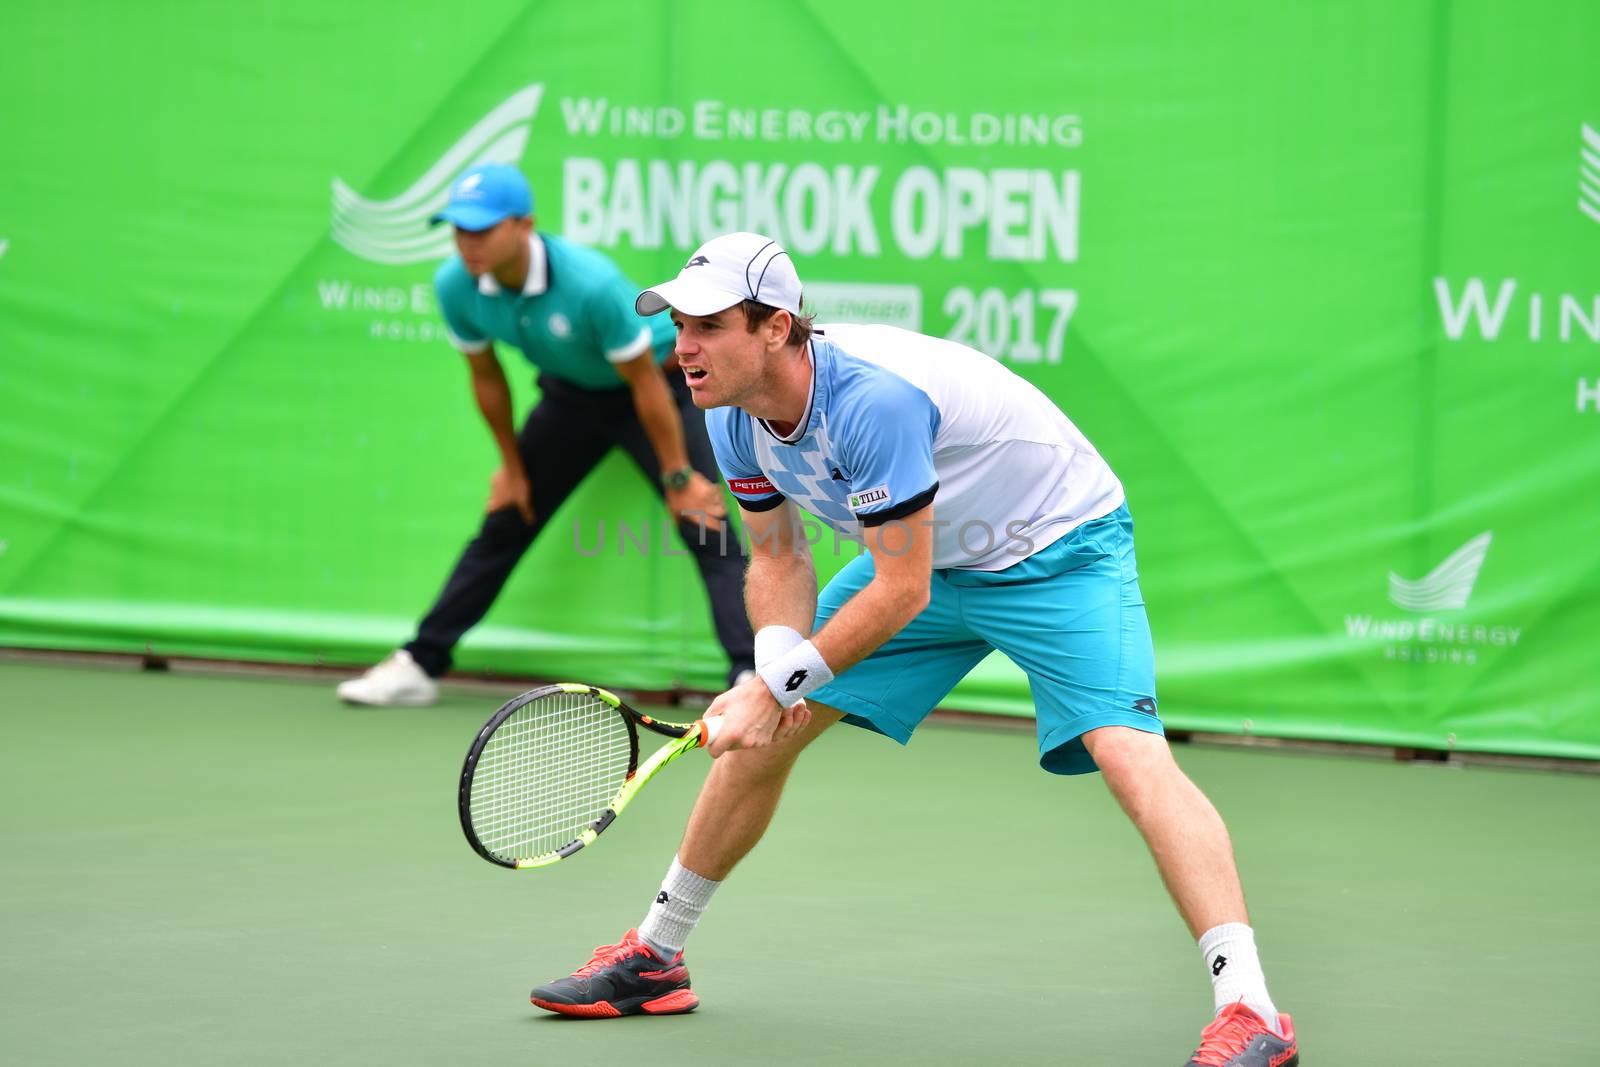 Wind Energy Holding Bangkok Open 2017 by chatchai